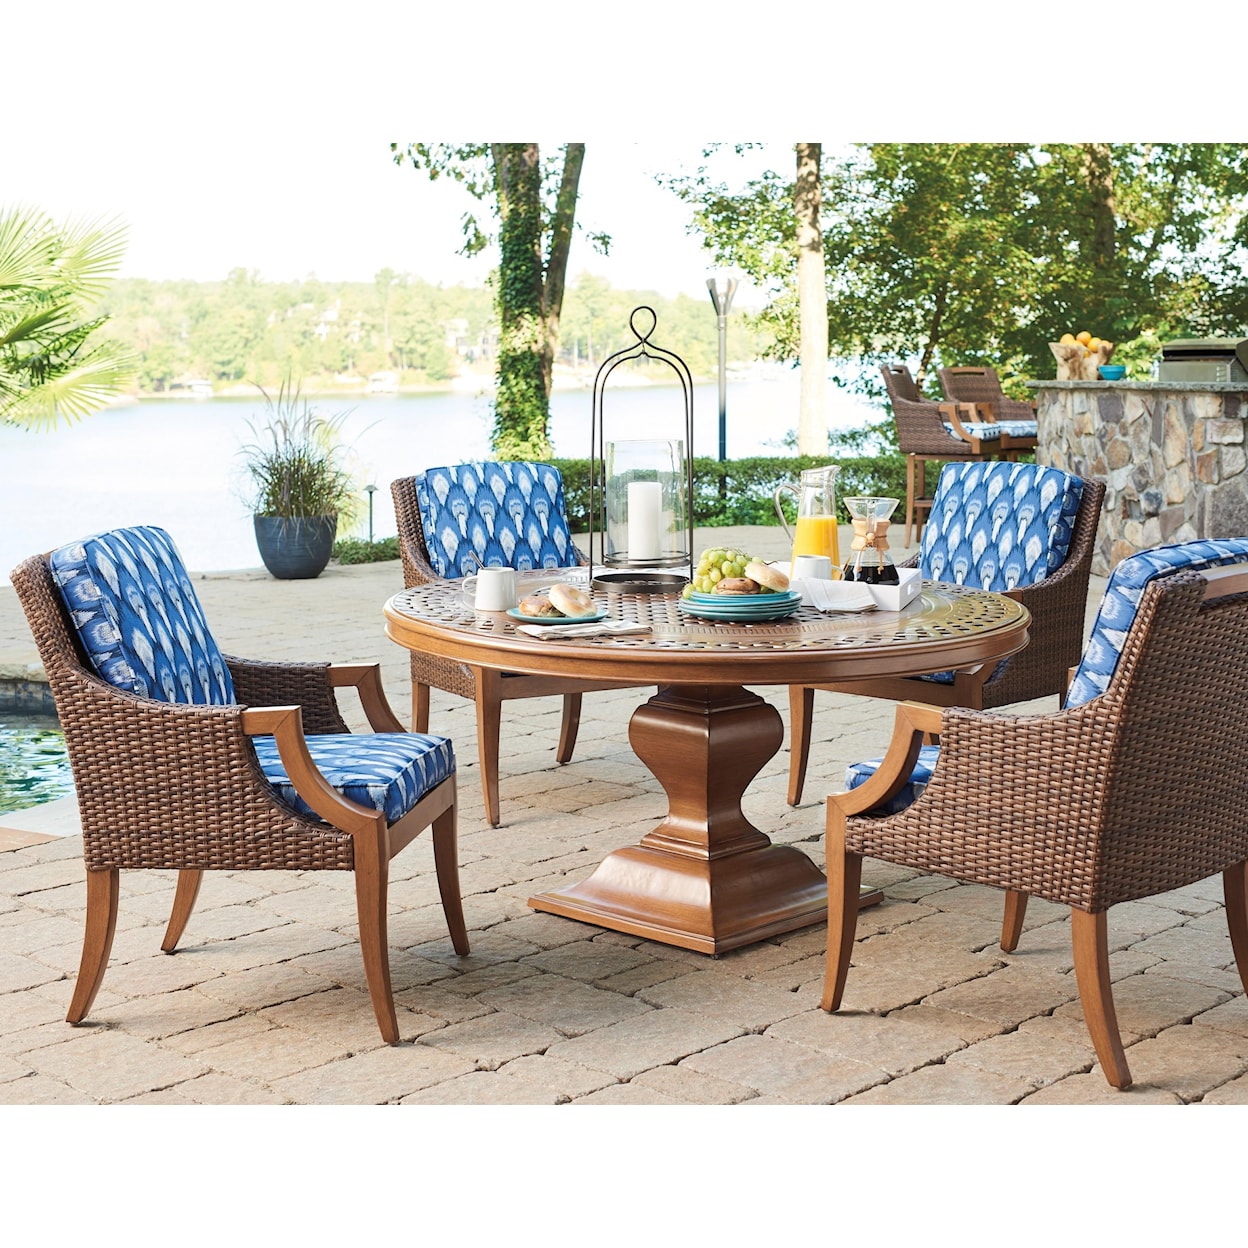 Tommy Bahama Outdoor Living Harbor Isle 5-Piece Outdoor Dining Set